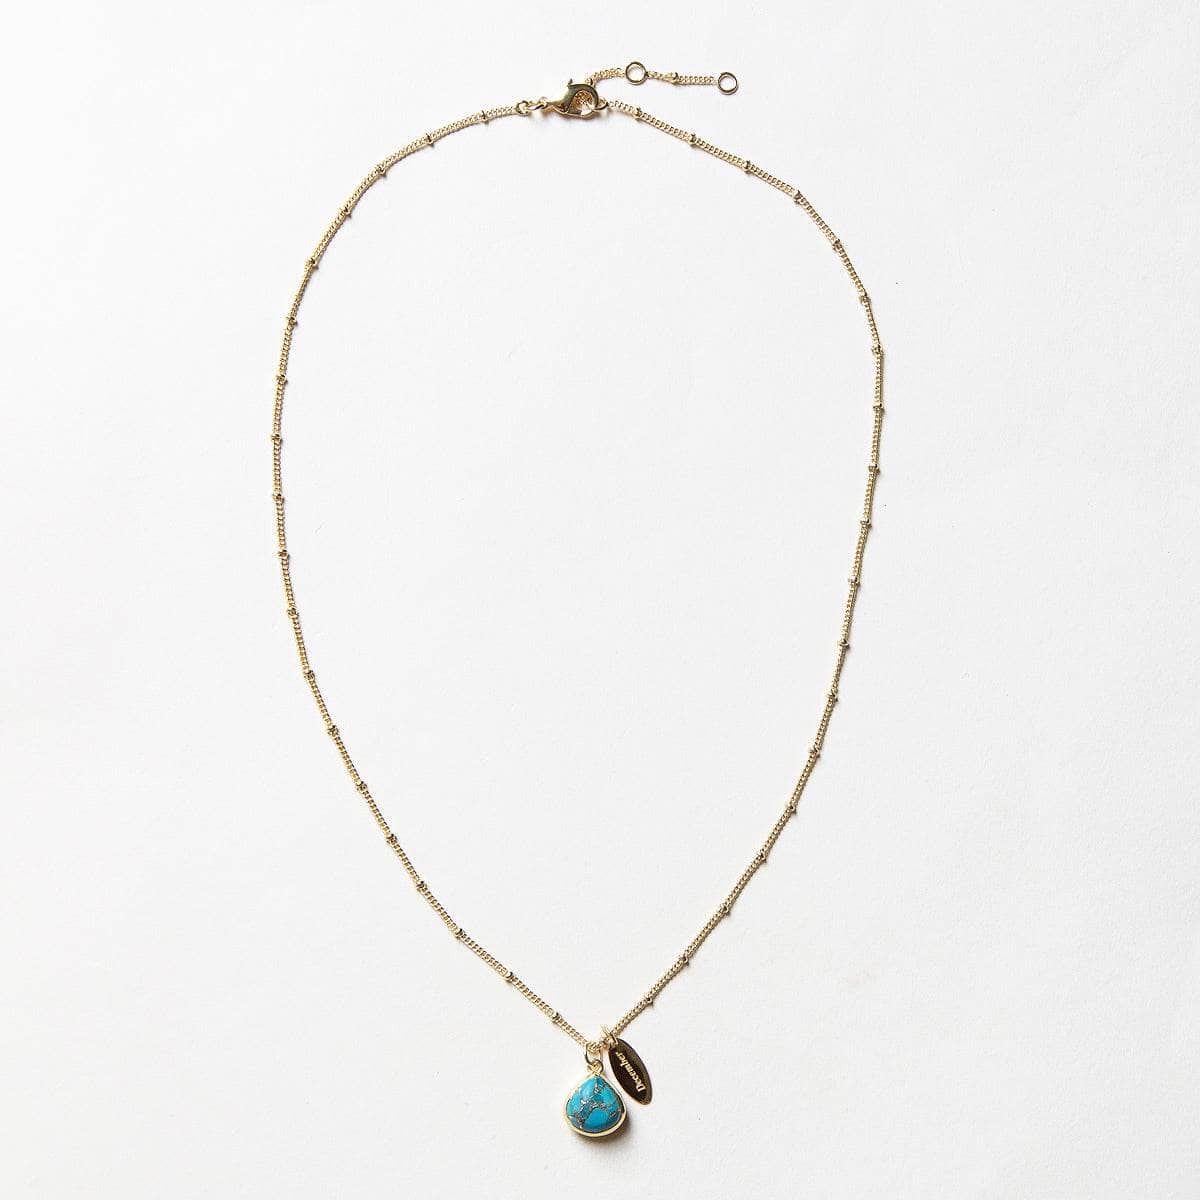 December Turquoise Birthstone Necklace by Tiny Rituals